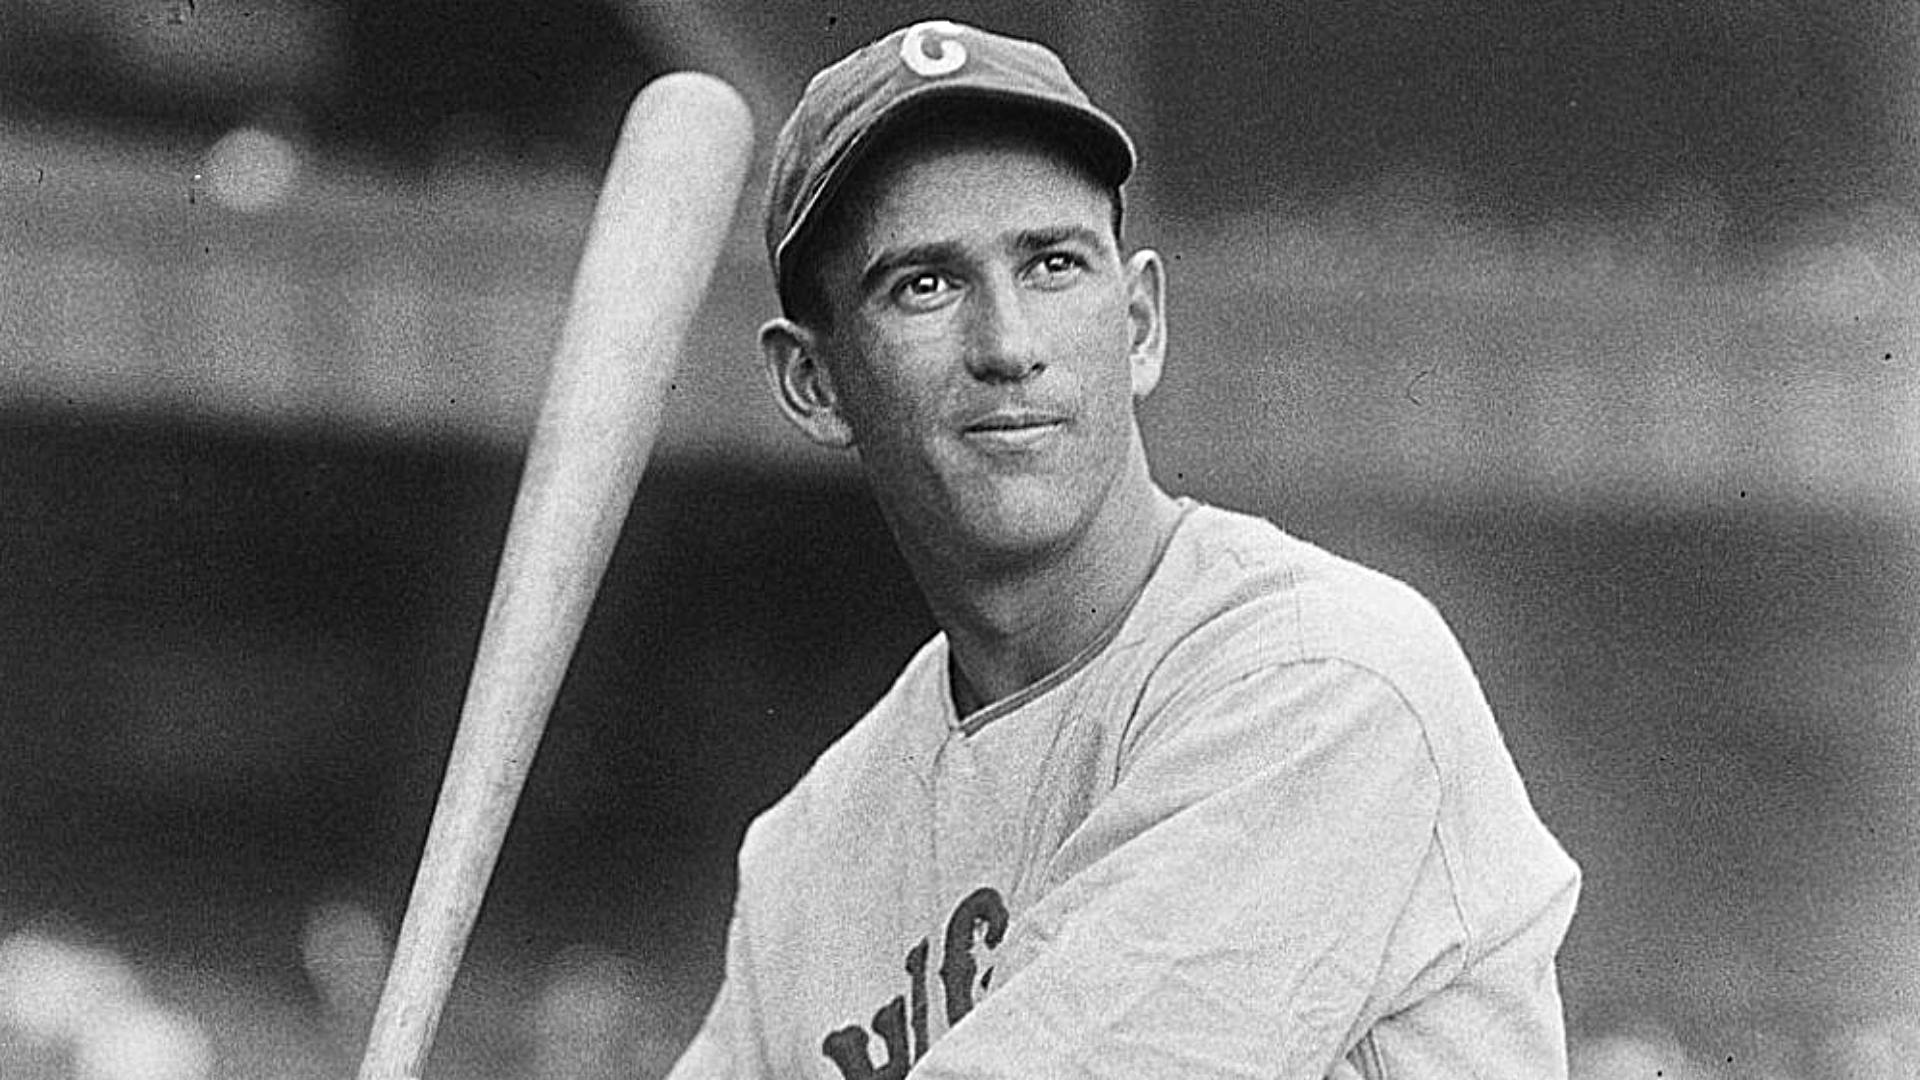 July 19, 1982: That time 75-year-old Luke Appling homered off Warren Spahn | Sporting News1920 x 1080